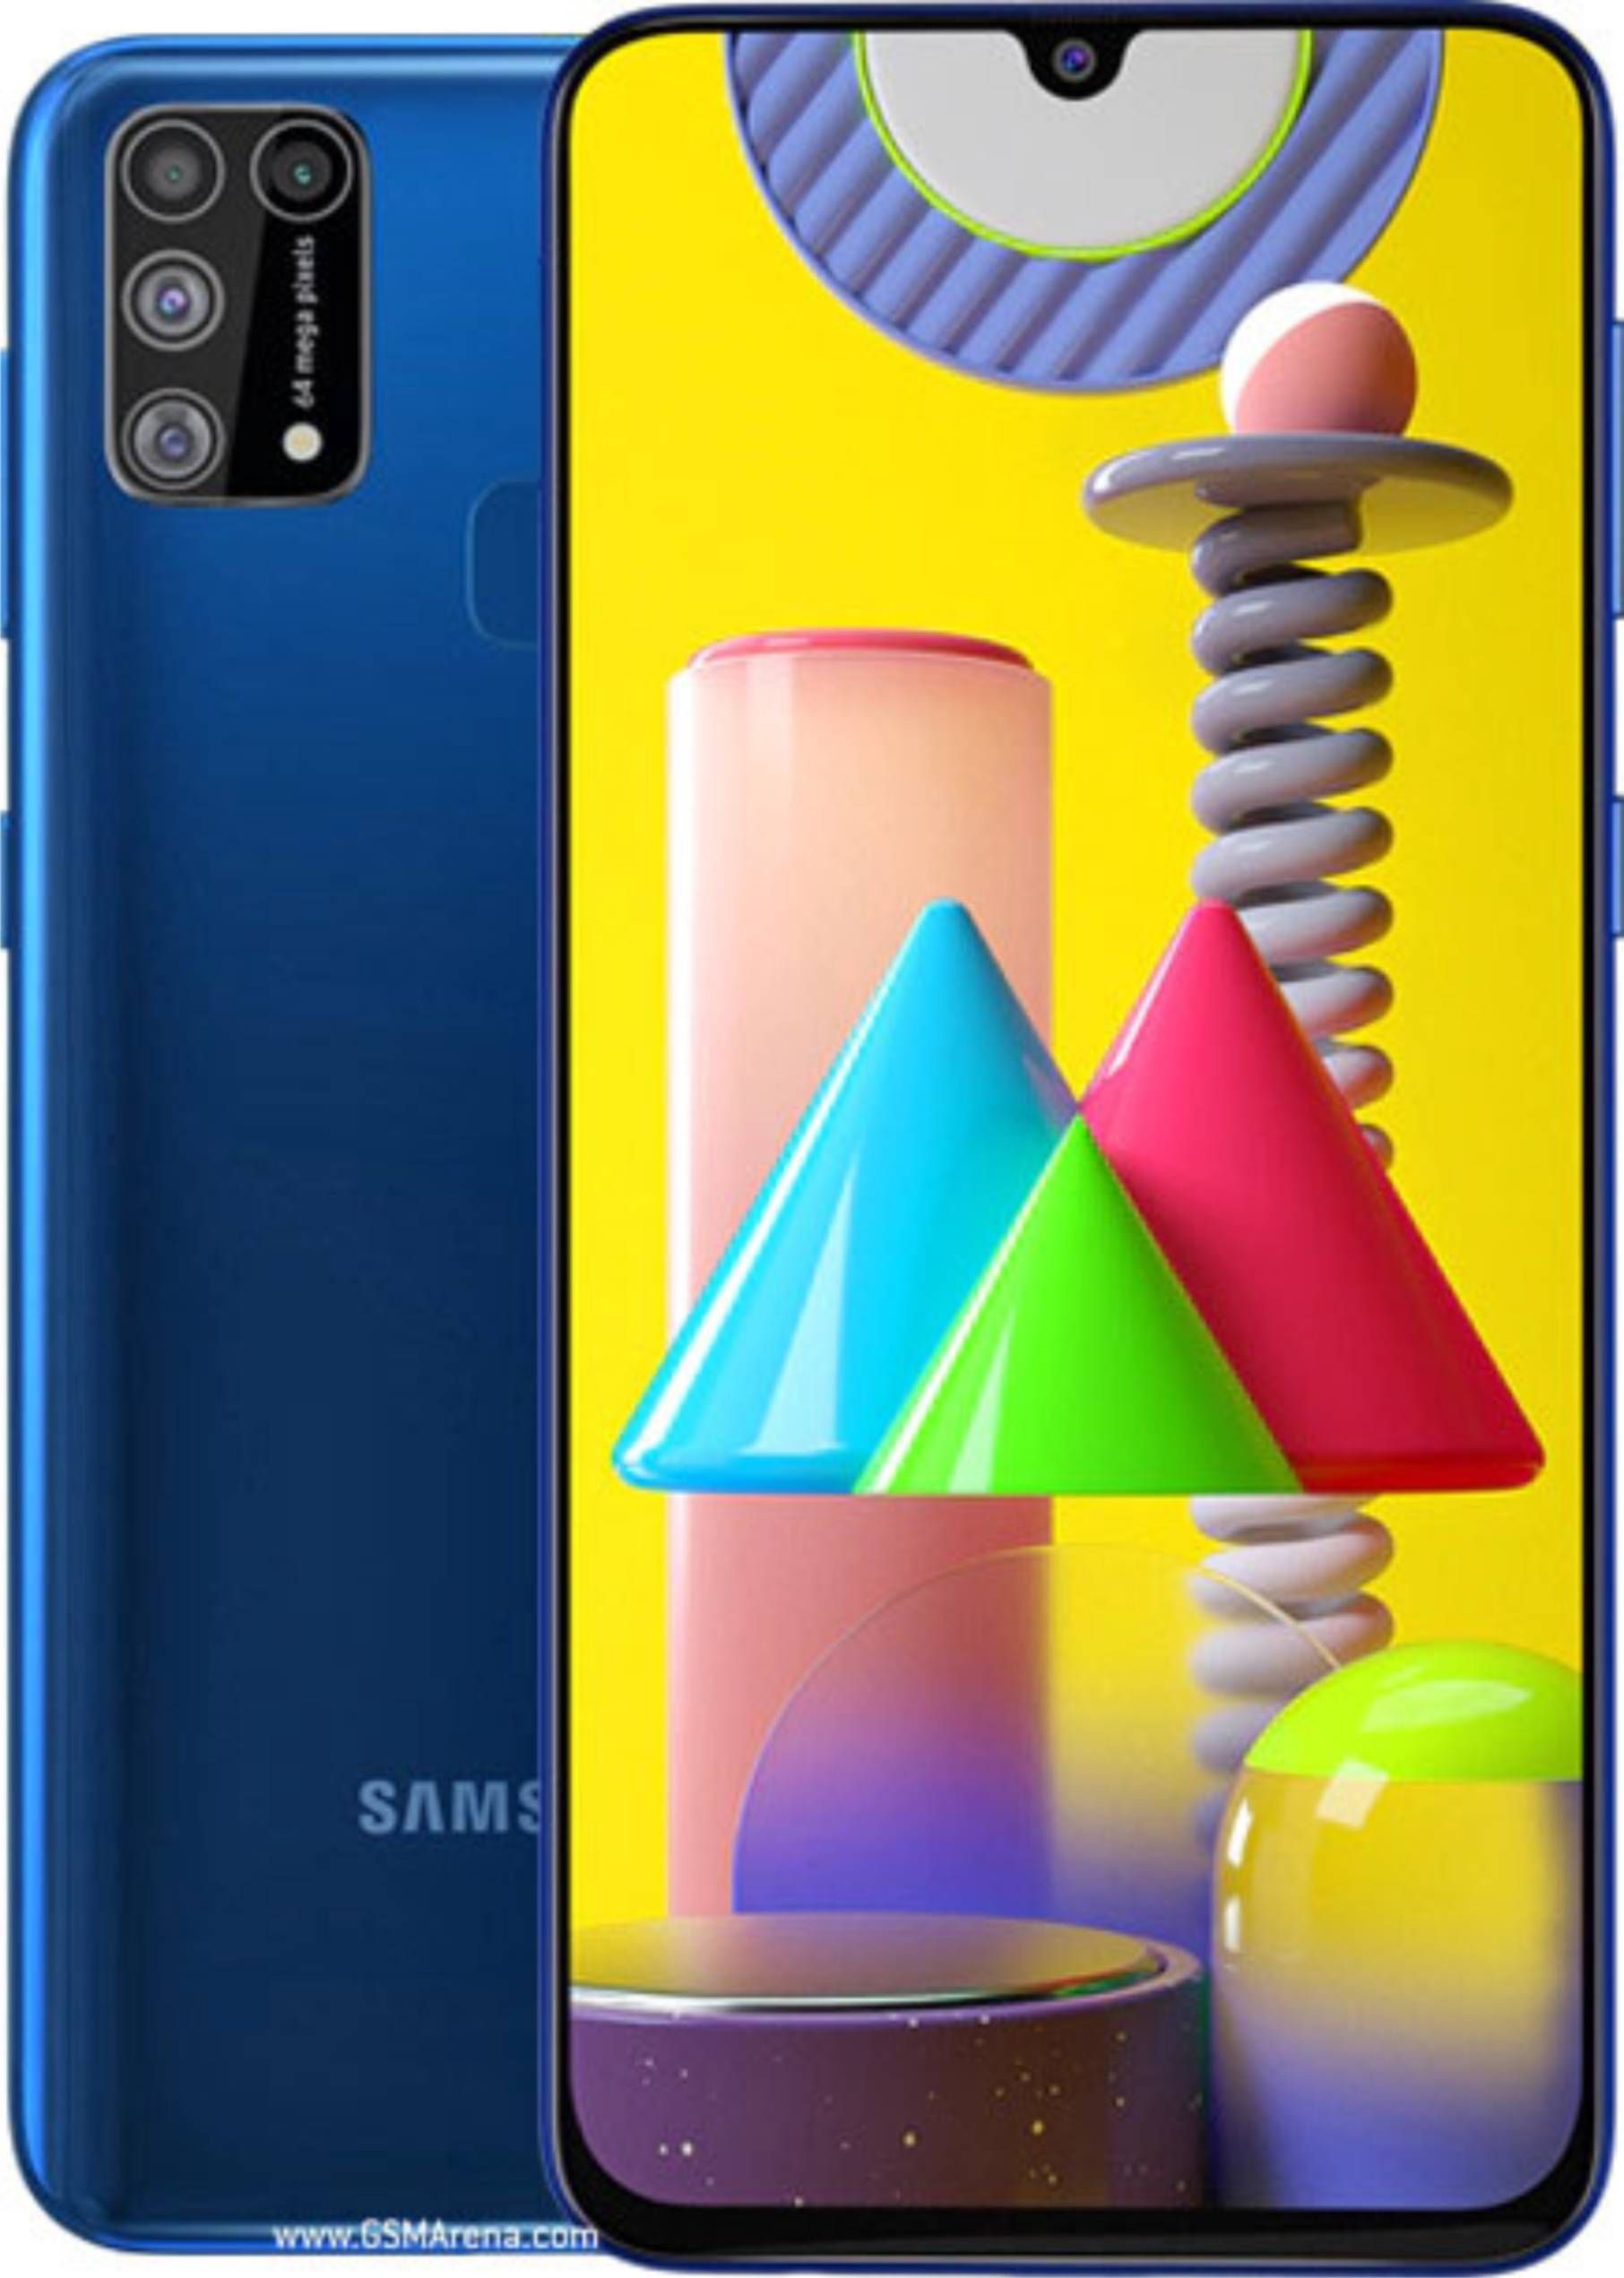 Samsung Galaxy M31 Specifications and Price in Eldoret